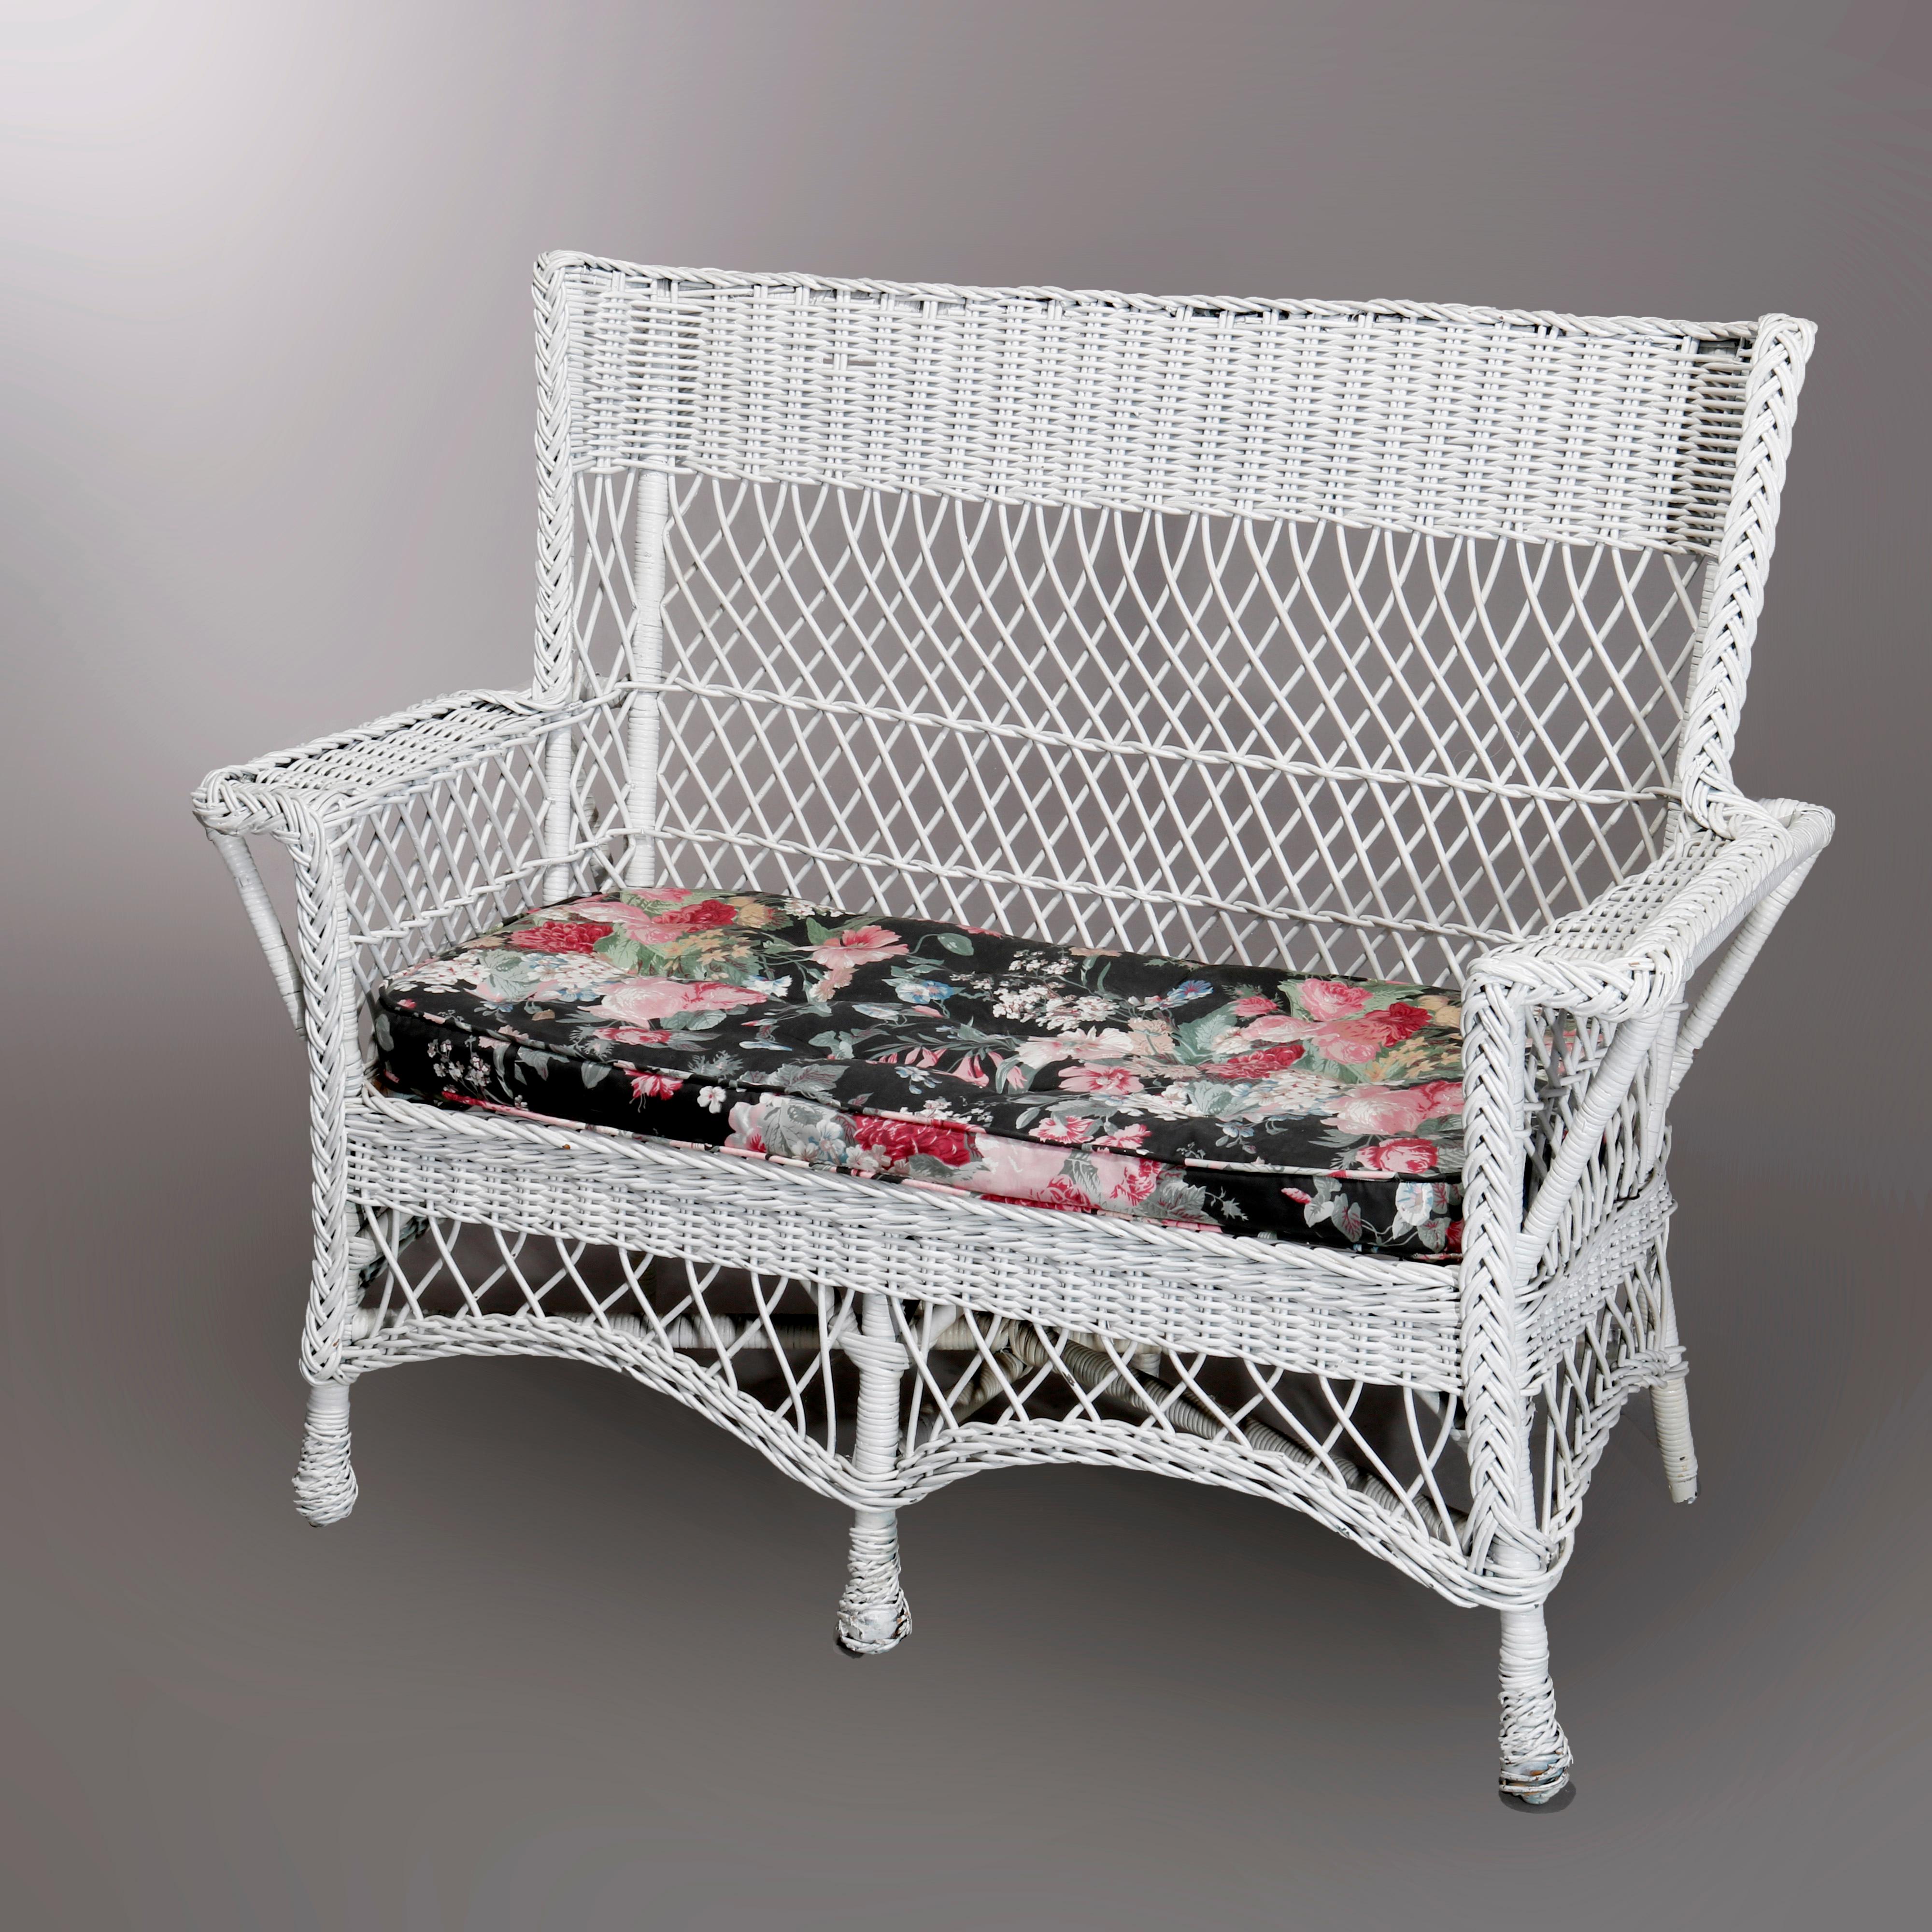 An antique Arts & Crafts Mission style settee offers wicker construction with floral cushions, c1910

Measures: 37.5